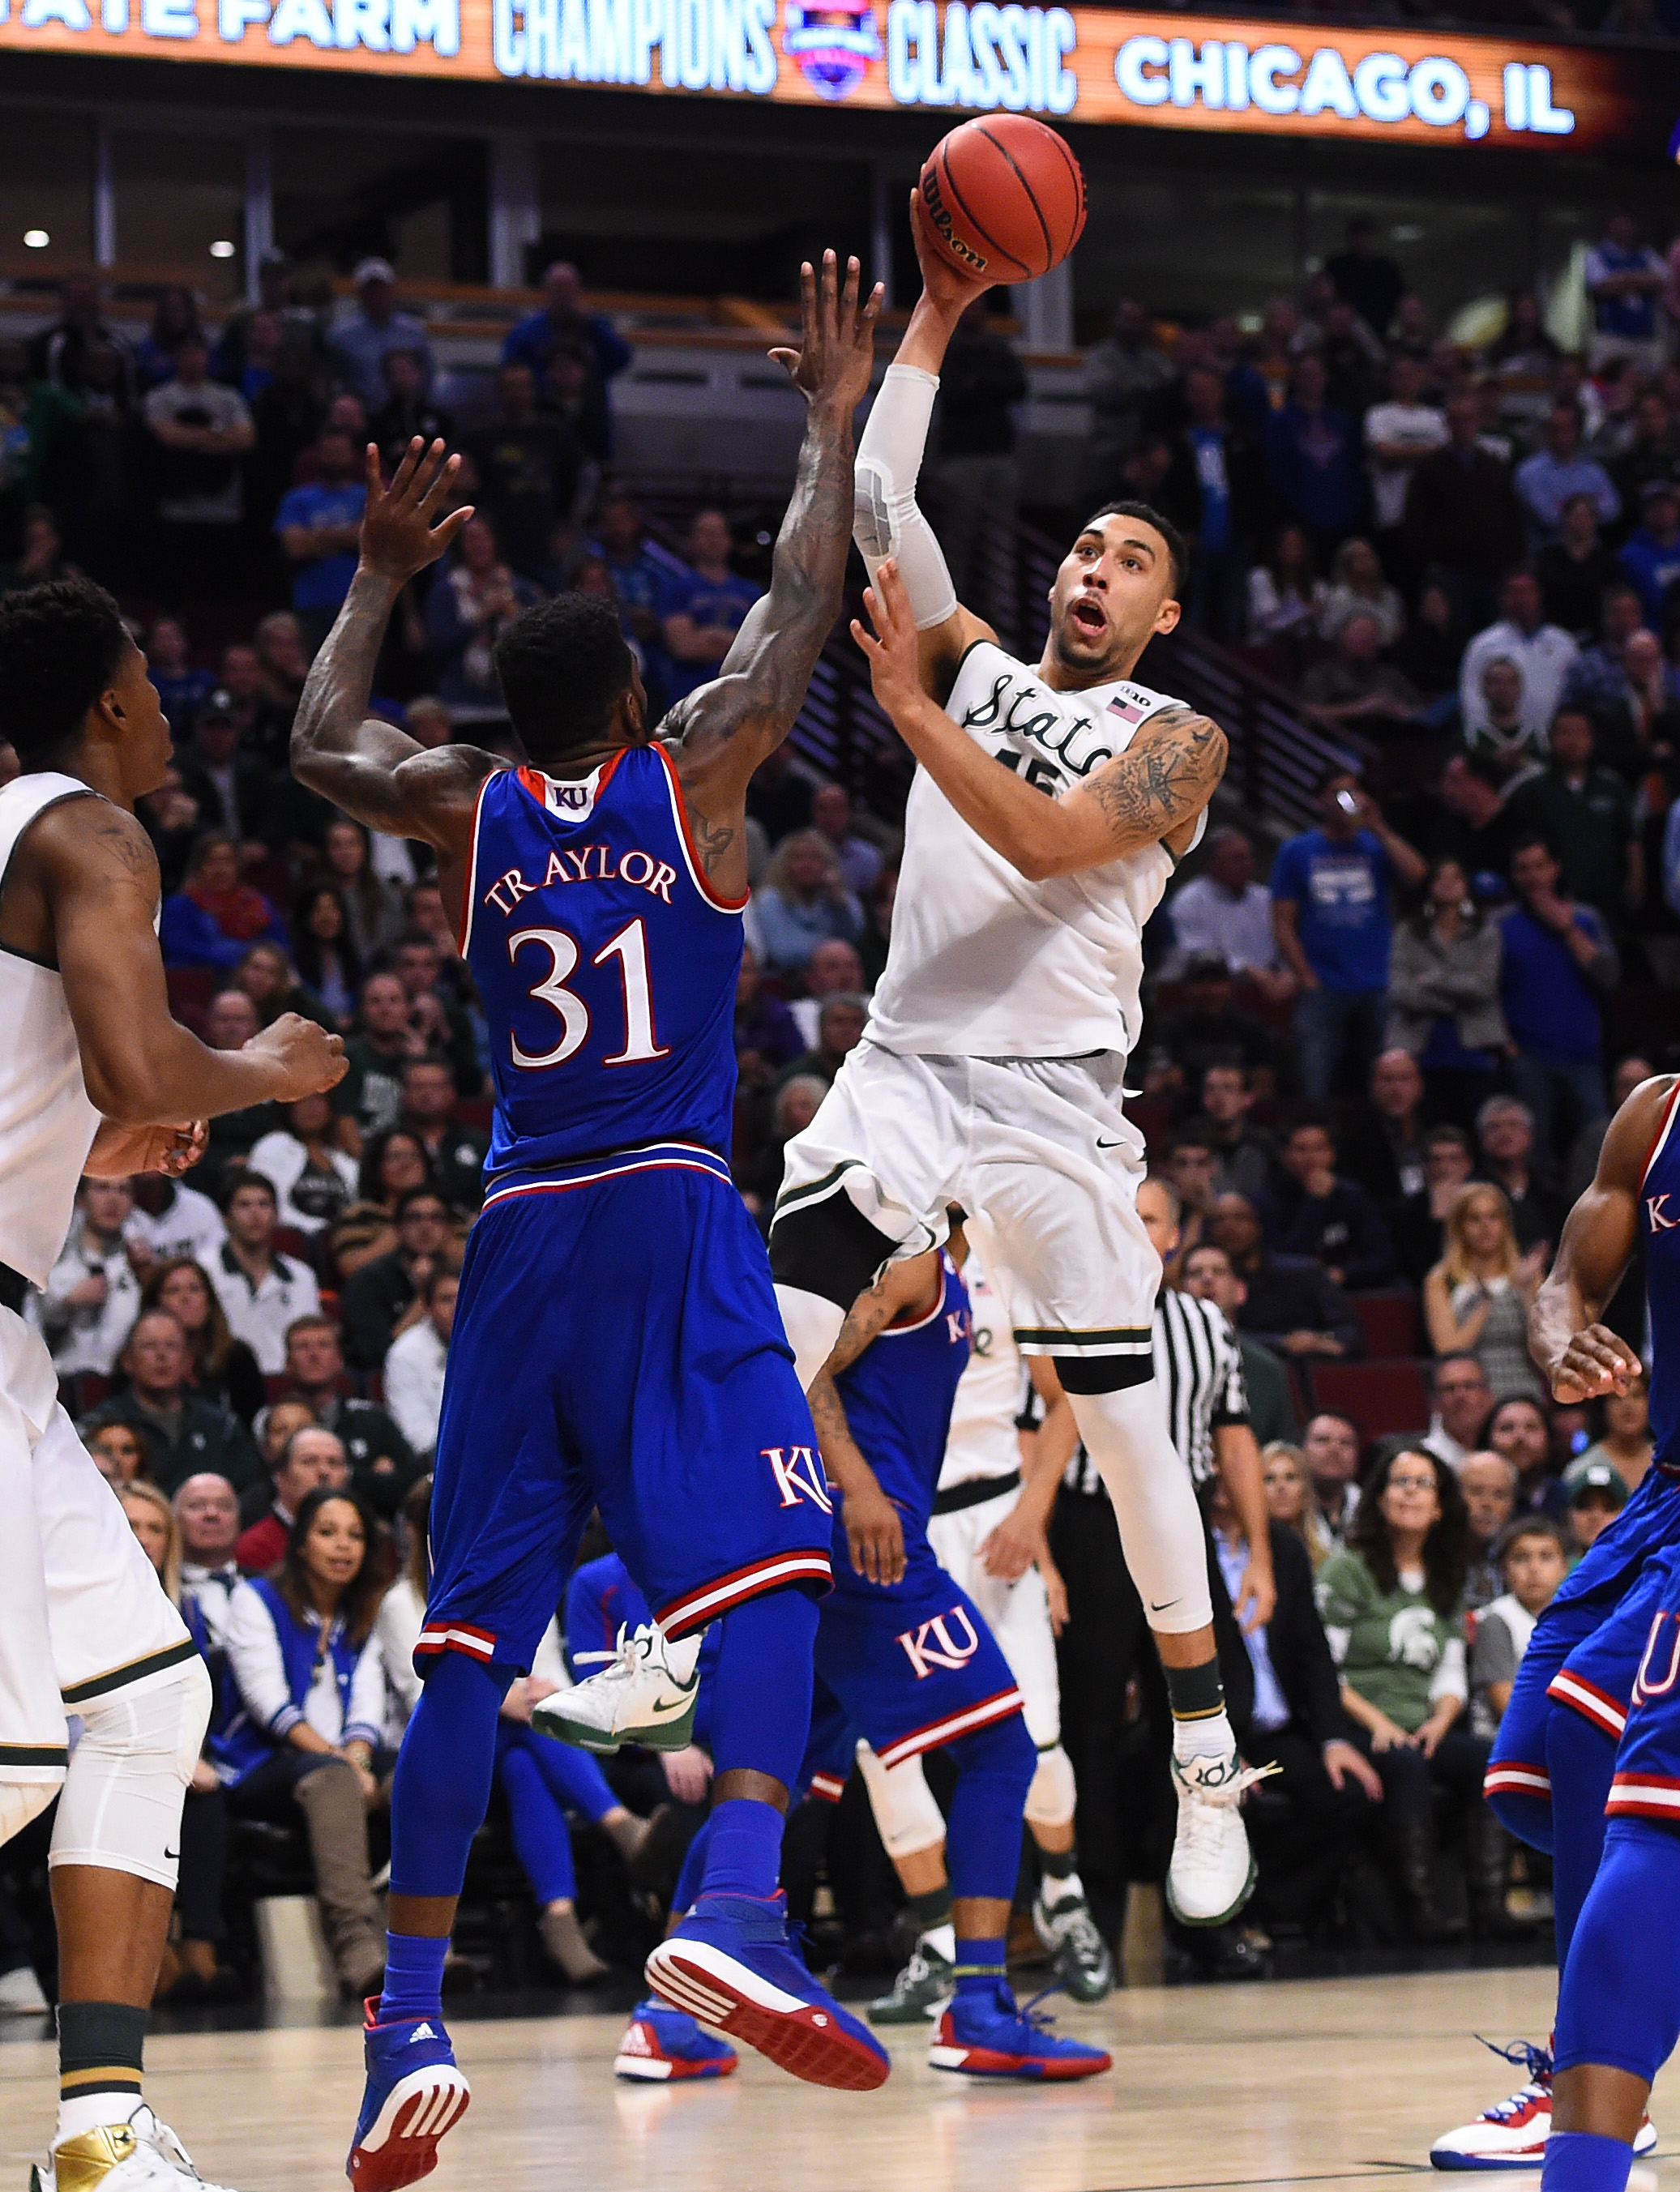 Nov 17, 2015; Chicago, IL, USA; Michigan State Spartans guard Denzel Valentine (45) shoots the ball against Kansas Jayhawks forward Jamari Traylor (31) during the first half at the United Center. Michigan State defeats Kansas 79-73. Mandatory Credit: Mike DiNovo-USA TODAY Sports